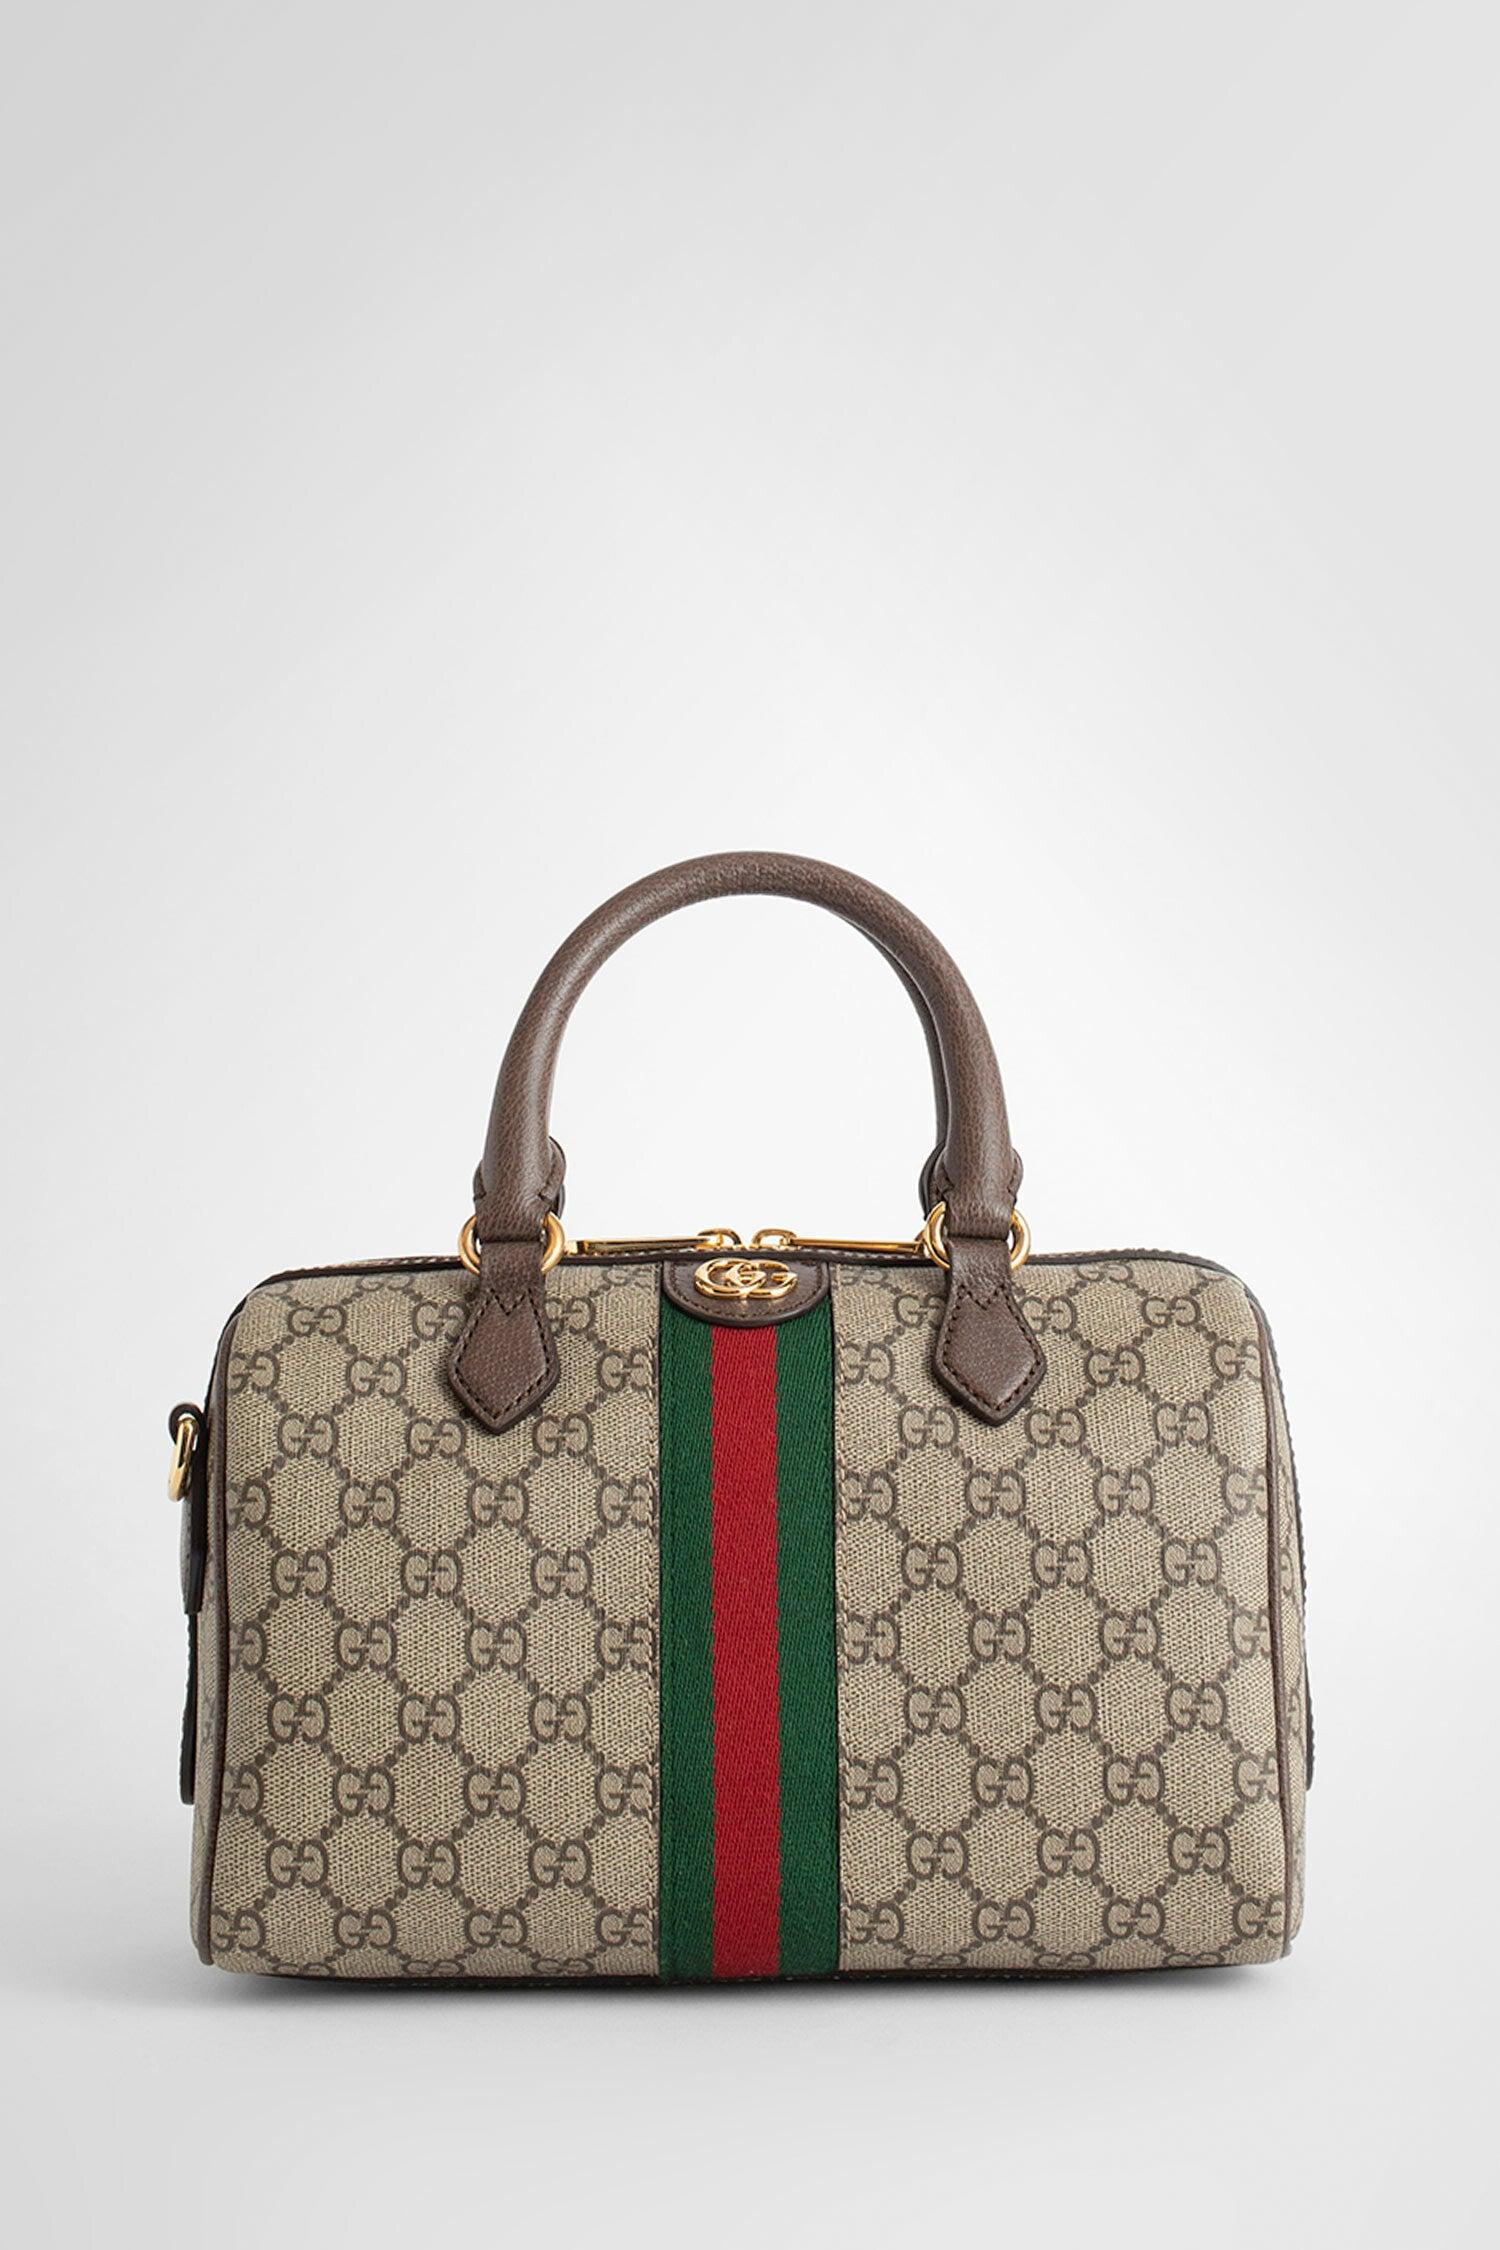 Gucci Ophidia GG Small Top Handle Bag in Brown | Lyst UK